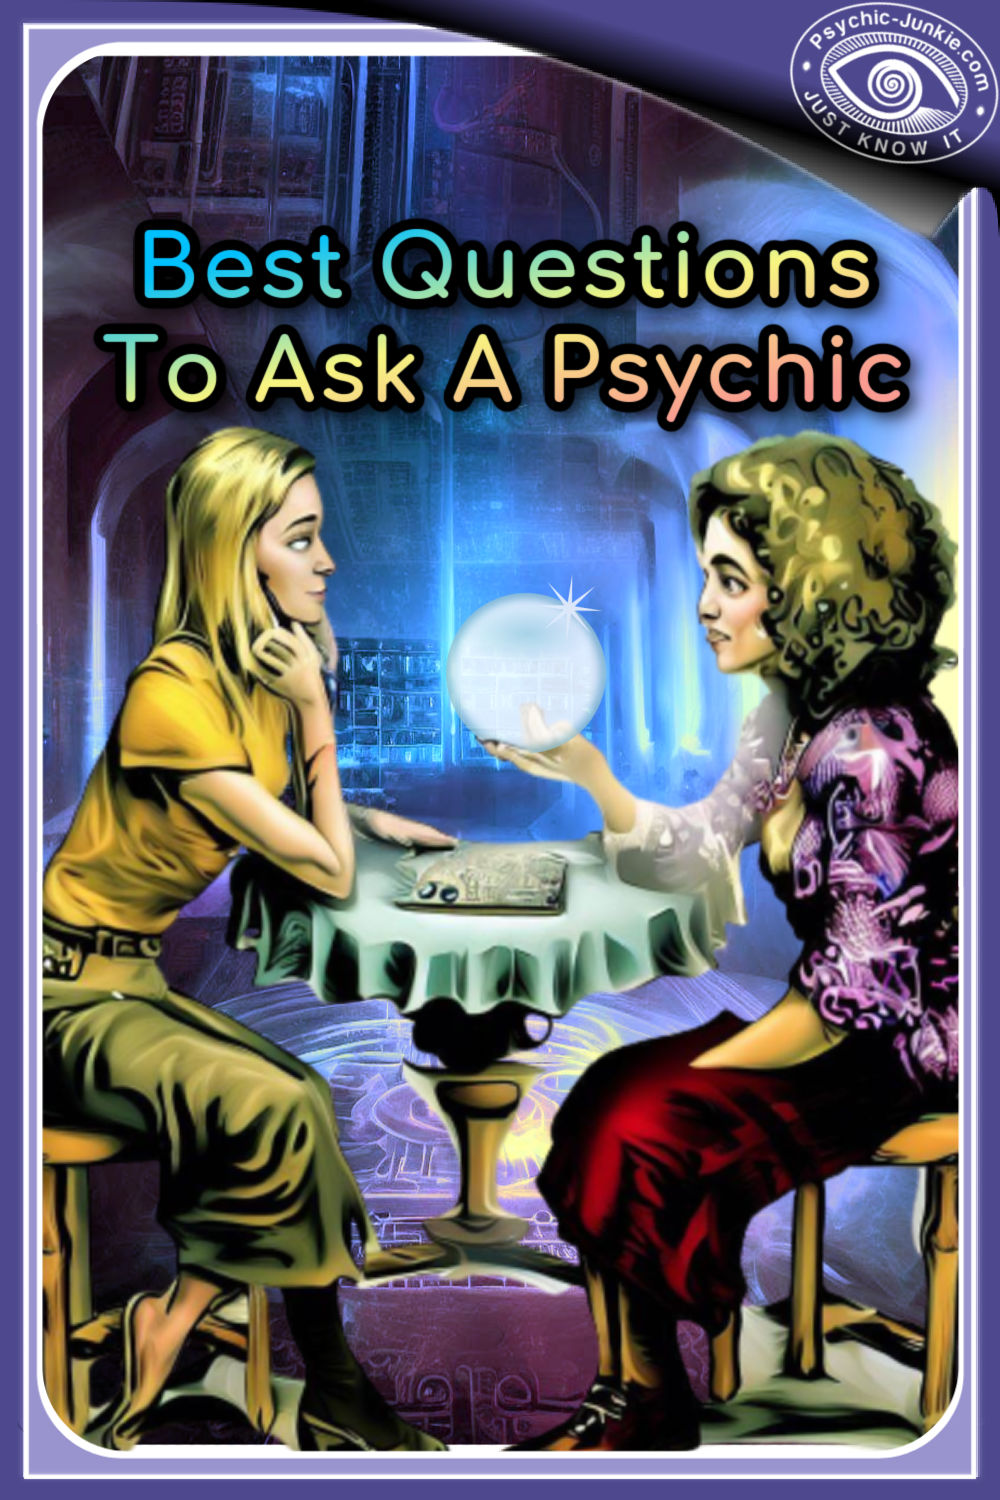 questions-to-ask-a-psychic.jpg